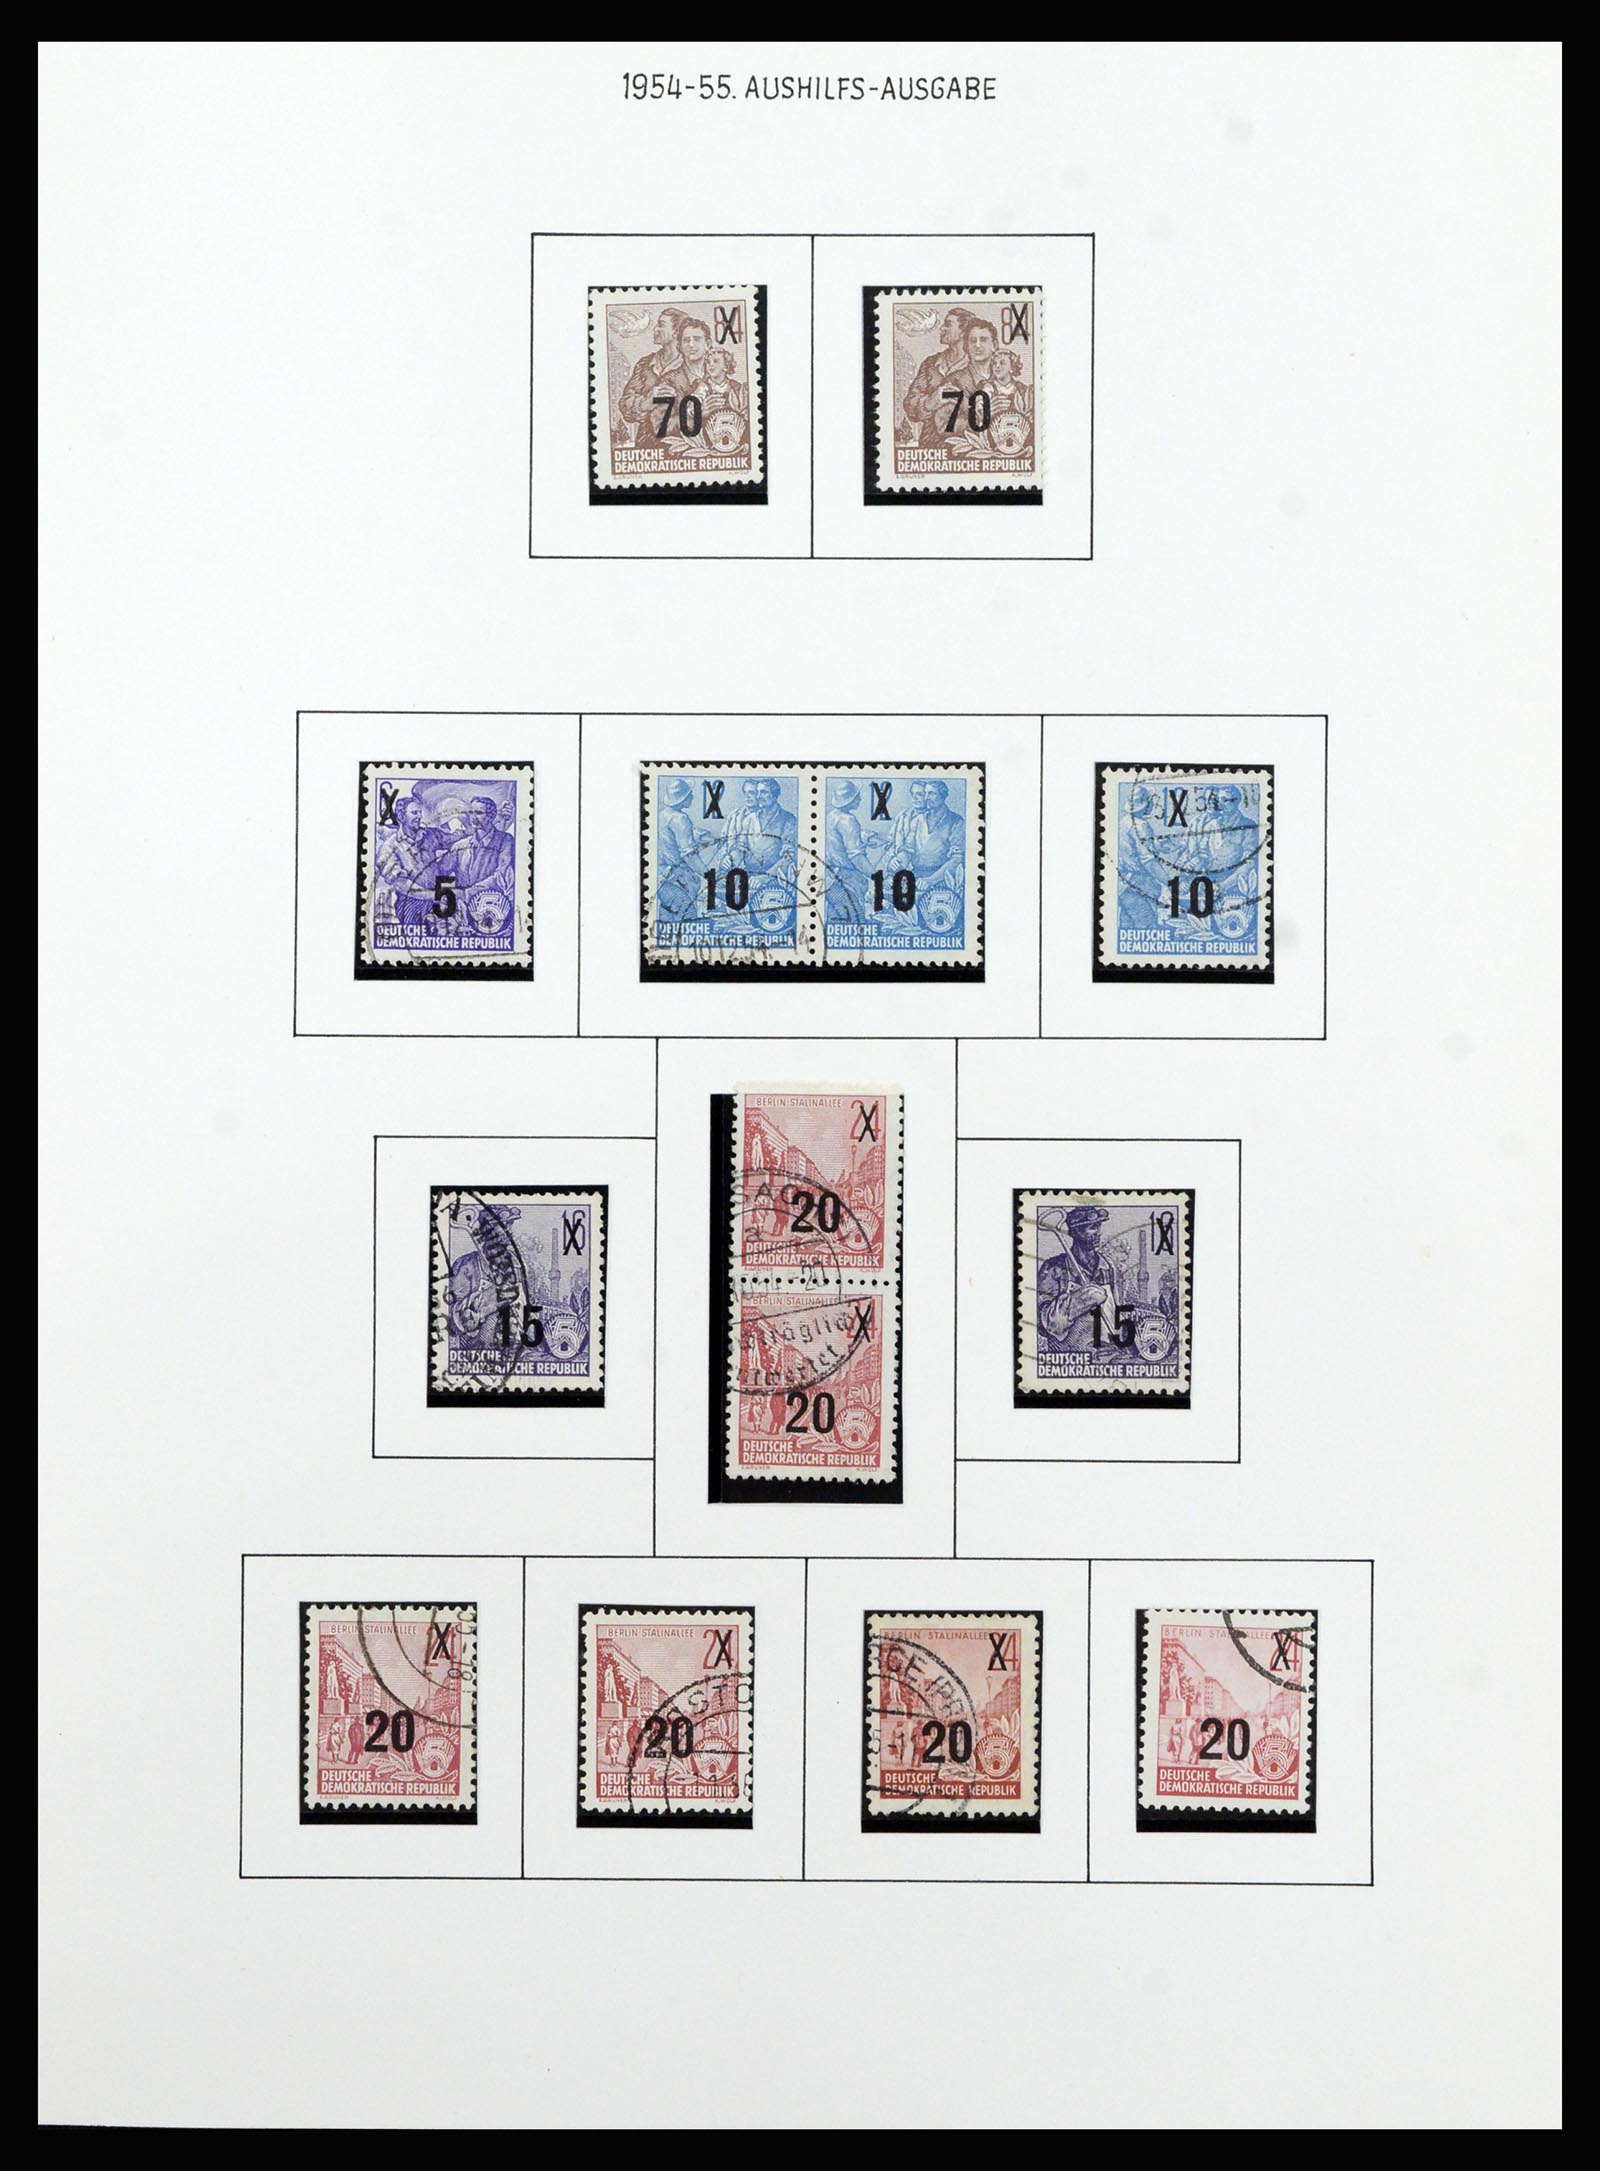 37101 002 - Stamp collection 37101 GDR 1954-1960.